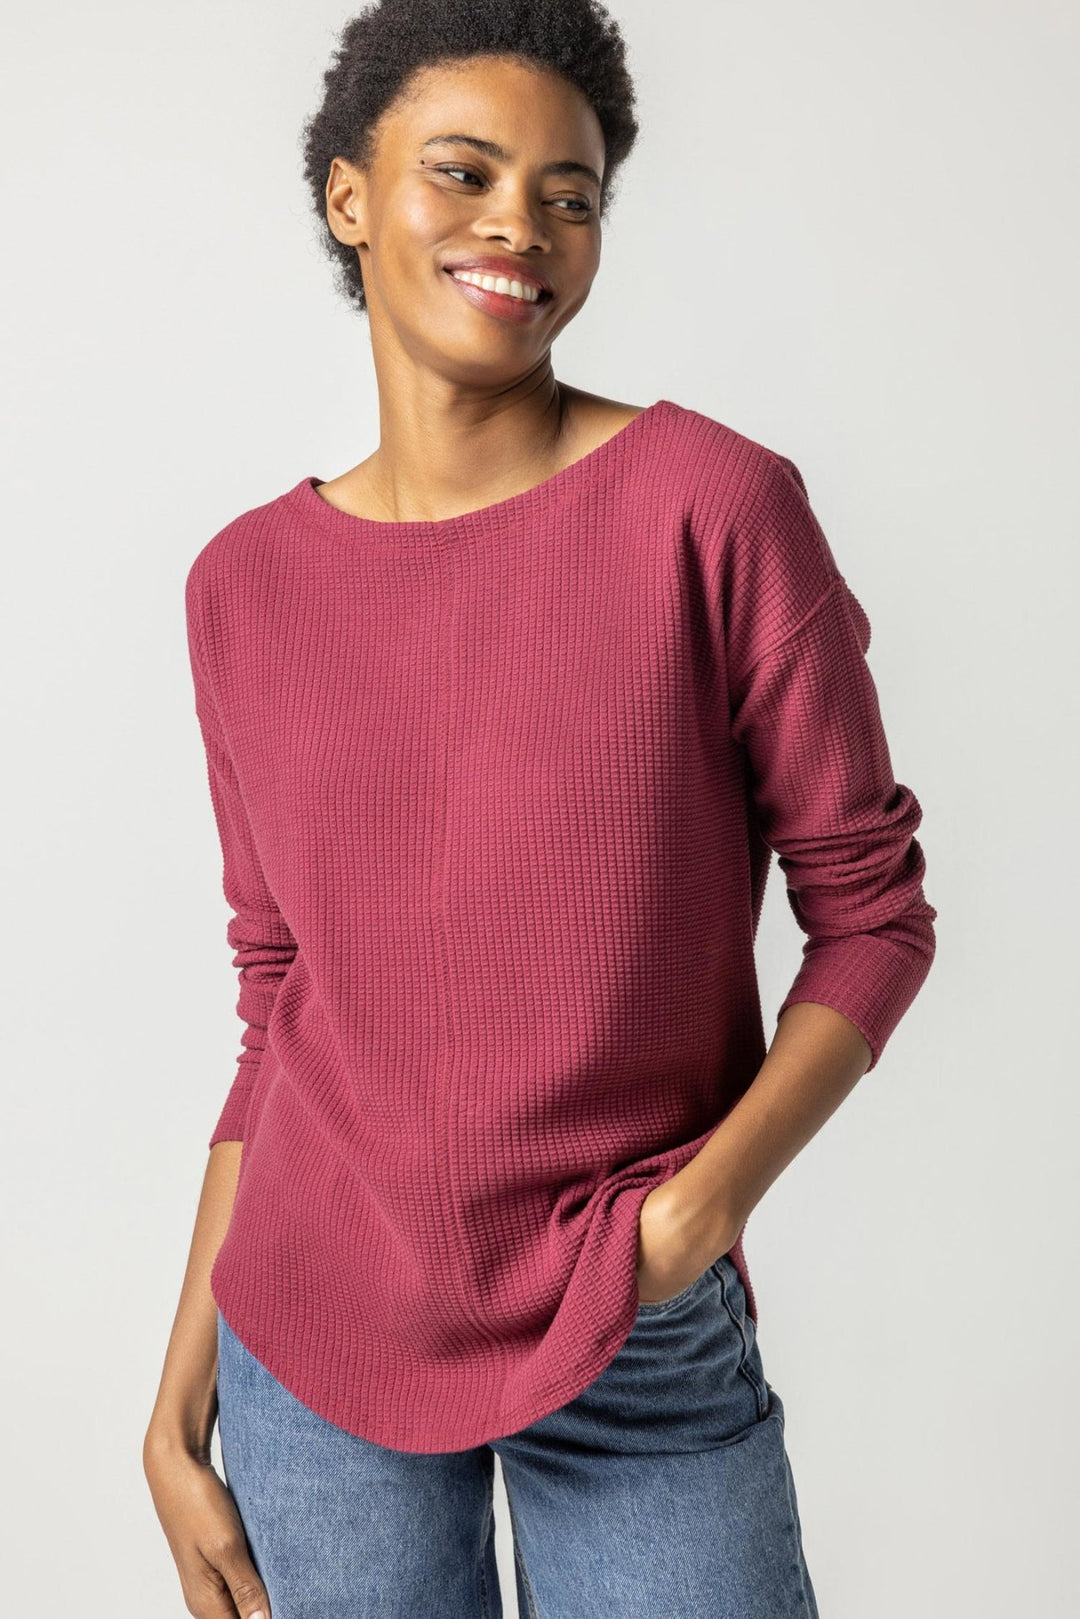 Lilla P - Shirttail Hem L/S Waffle: Rosewood - Shorely Chic Boutique